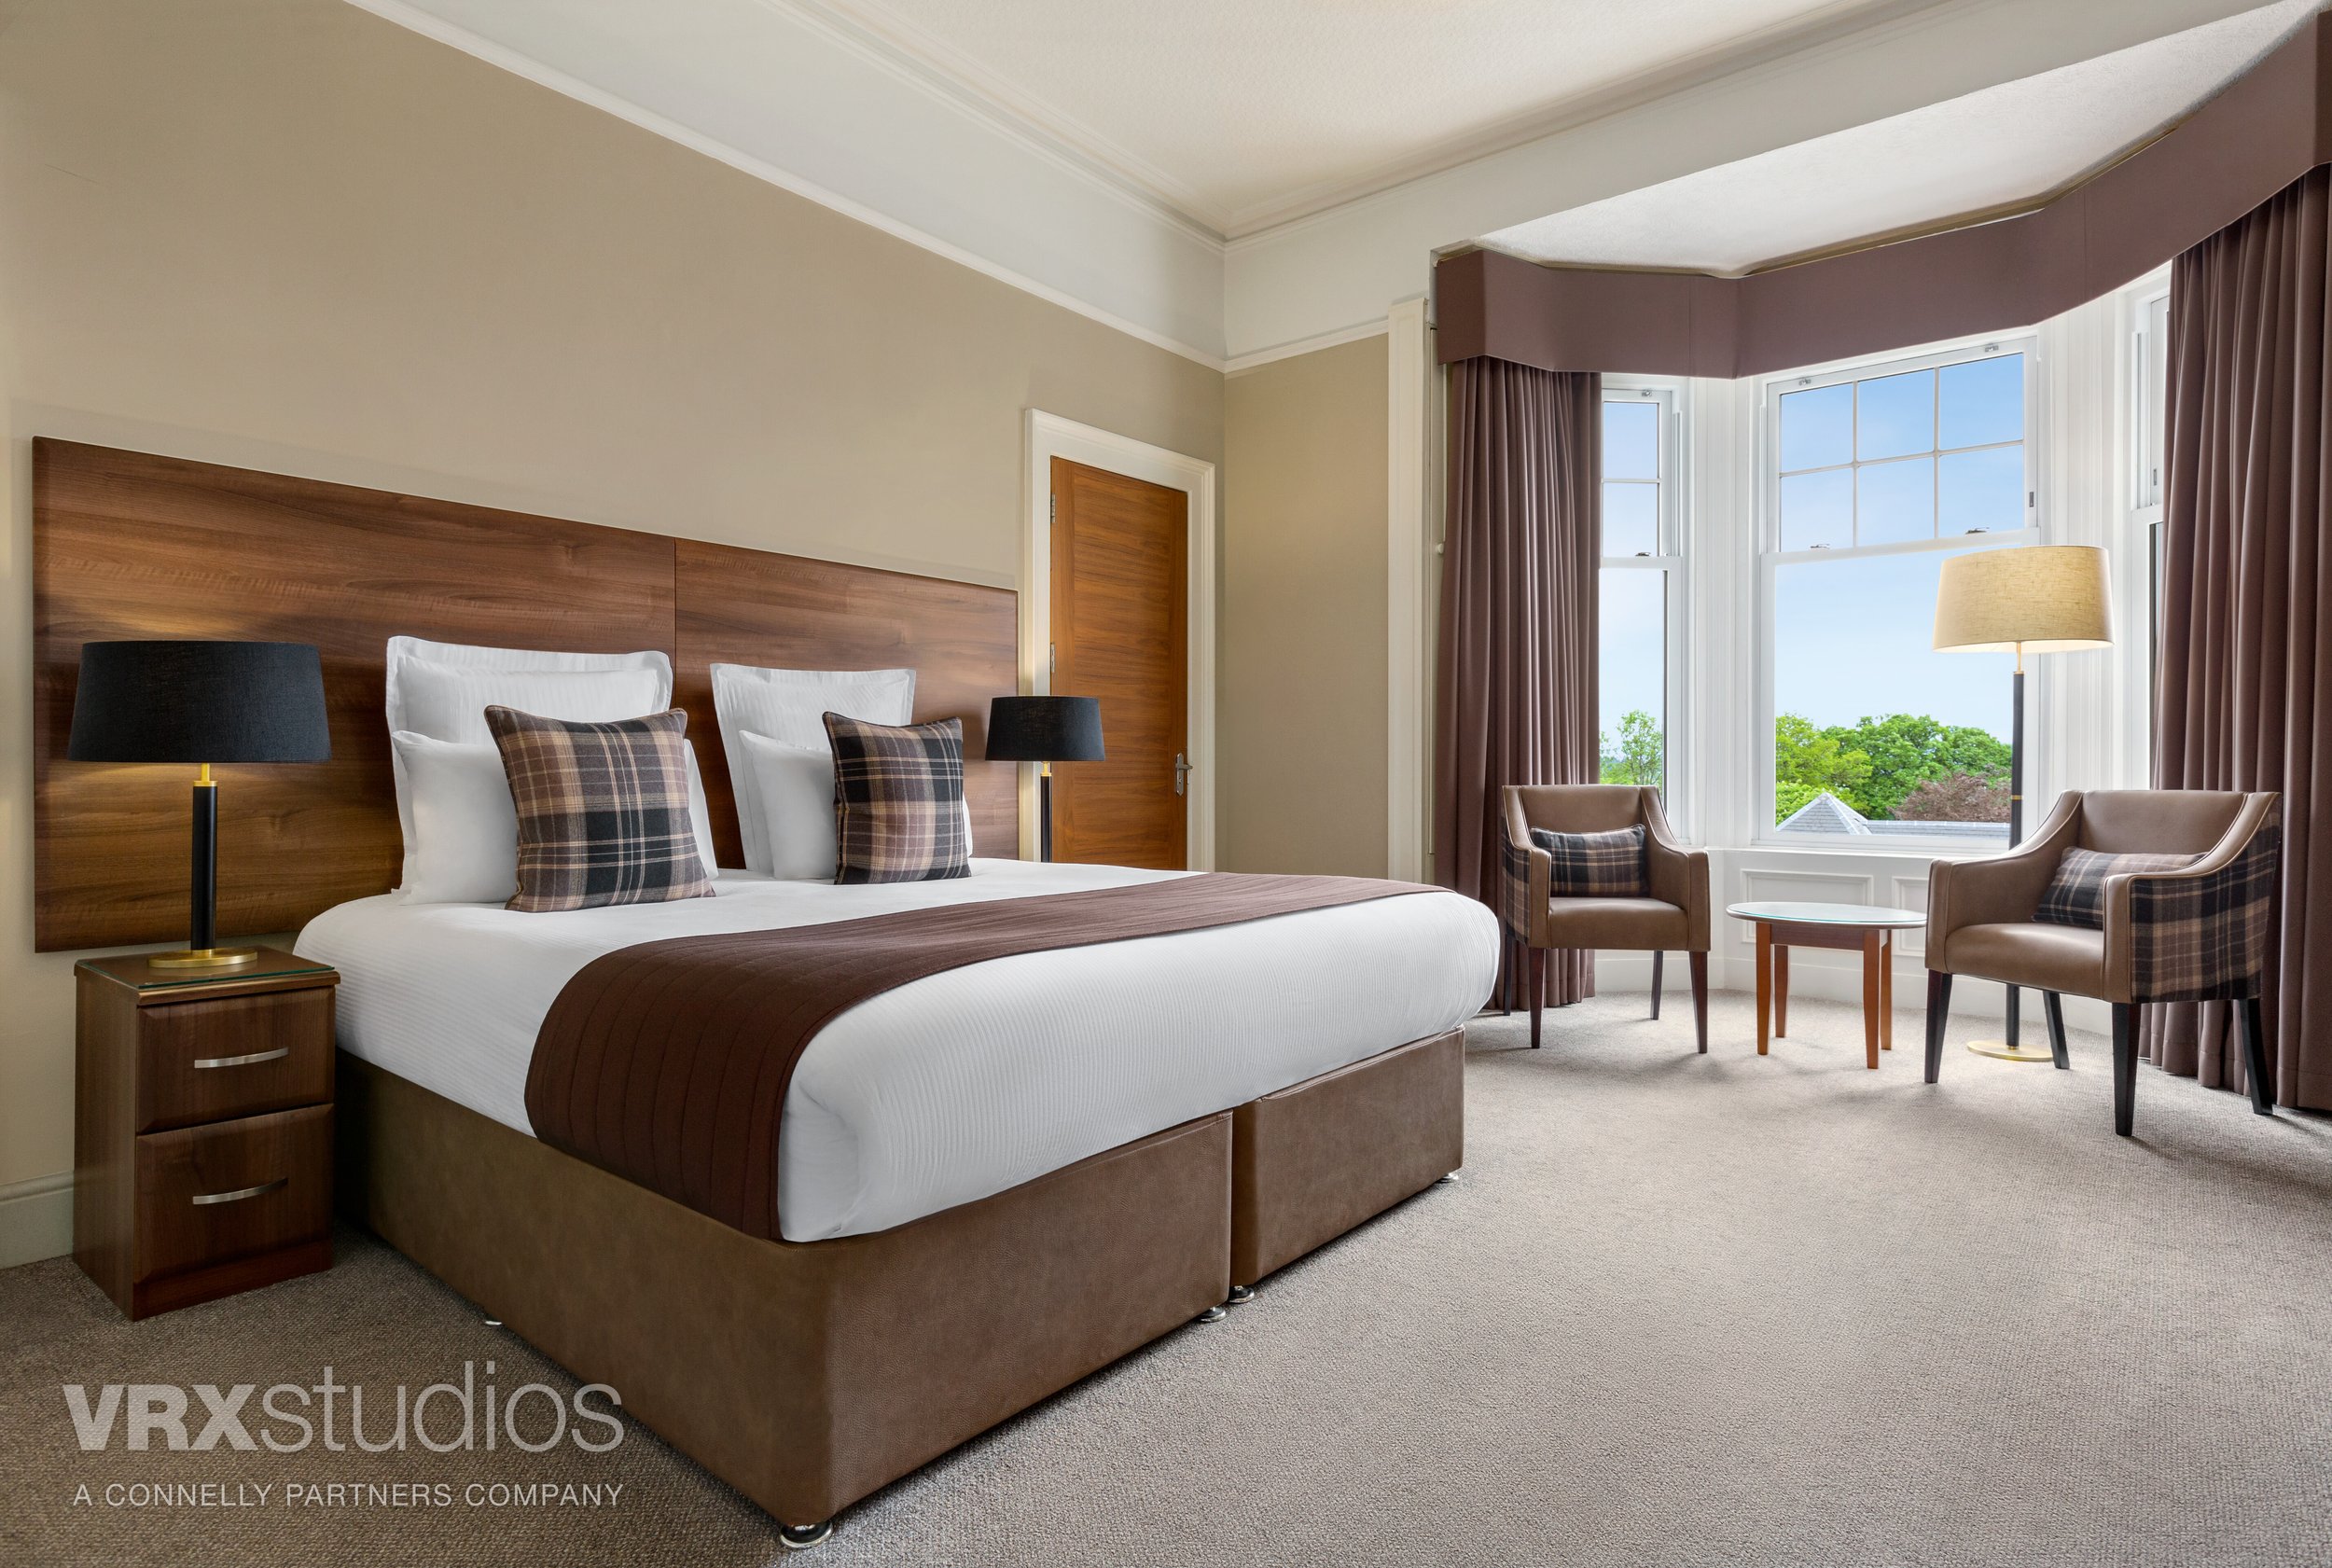 Client: VRX Studios • Project: Wyndham Duchally Country Estate, Scotland • Photographer: Marcelo Barbosa • Produced by: VRX Studios 22/05/2022